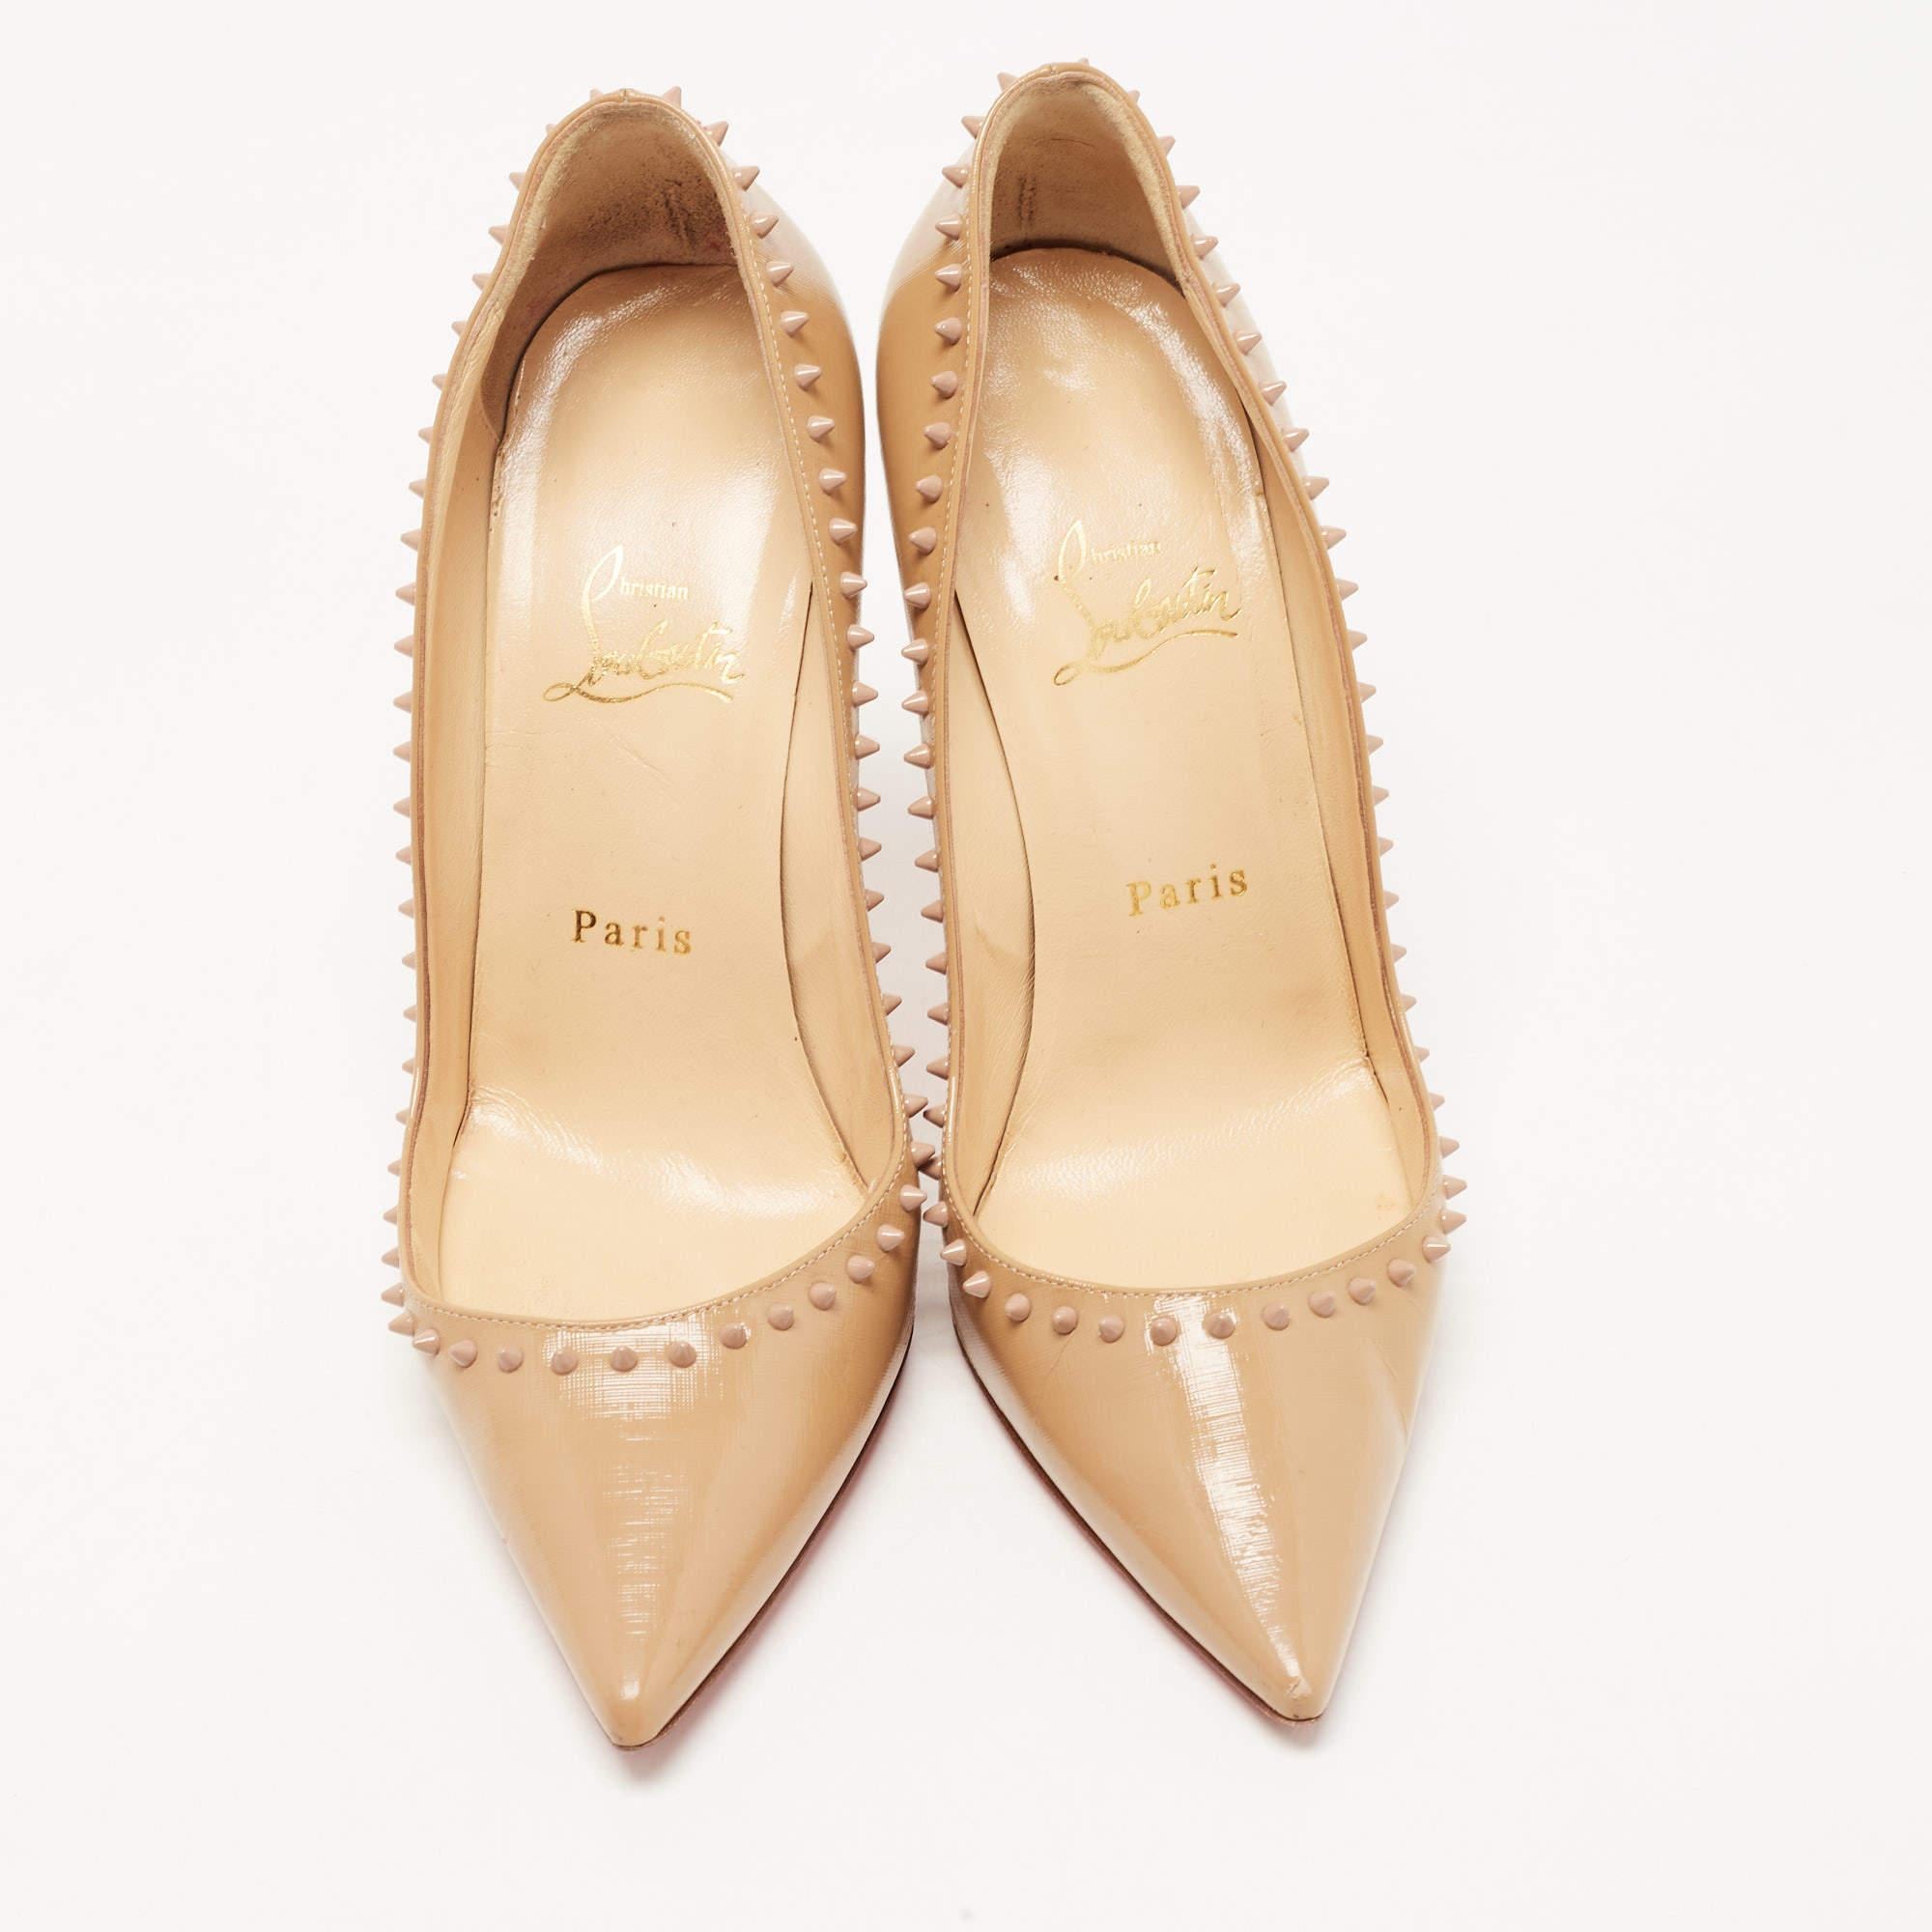 Christian Louboutin Beige Patent Leather Anjalina Spike Pointed Toe Pumps Size 3 In Good Condition For Sale In Dubai, Al Qouz 2